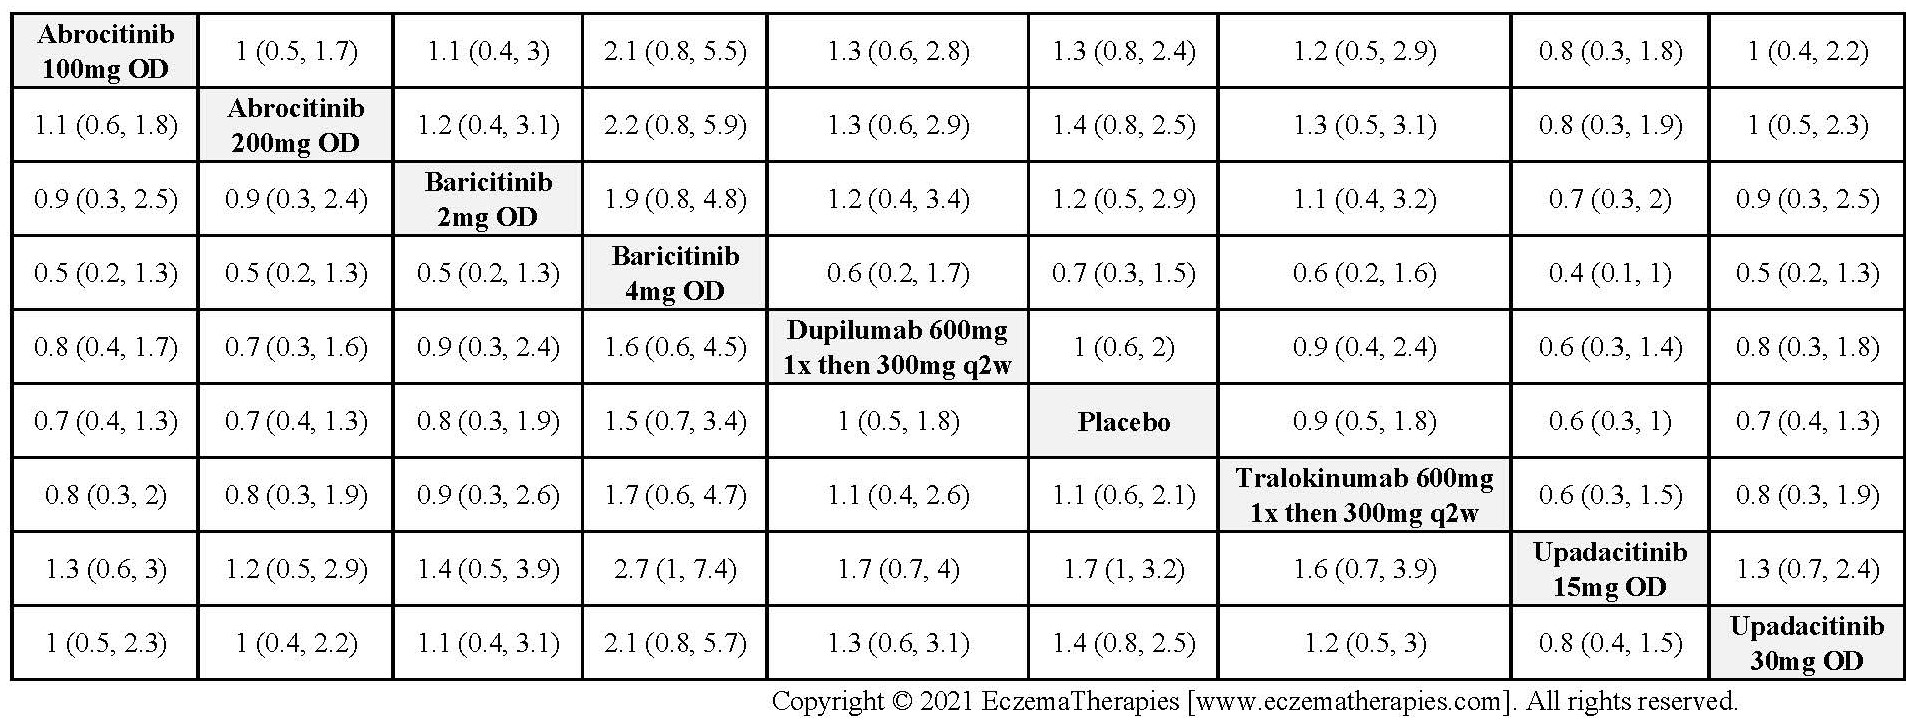 League table with relative effect estimates for withdrawals from adverse events up to 16 weeks of treatment for selected medications and placebo in adults